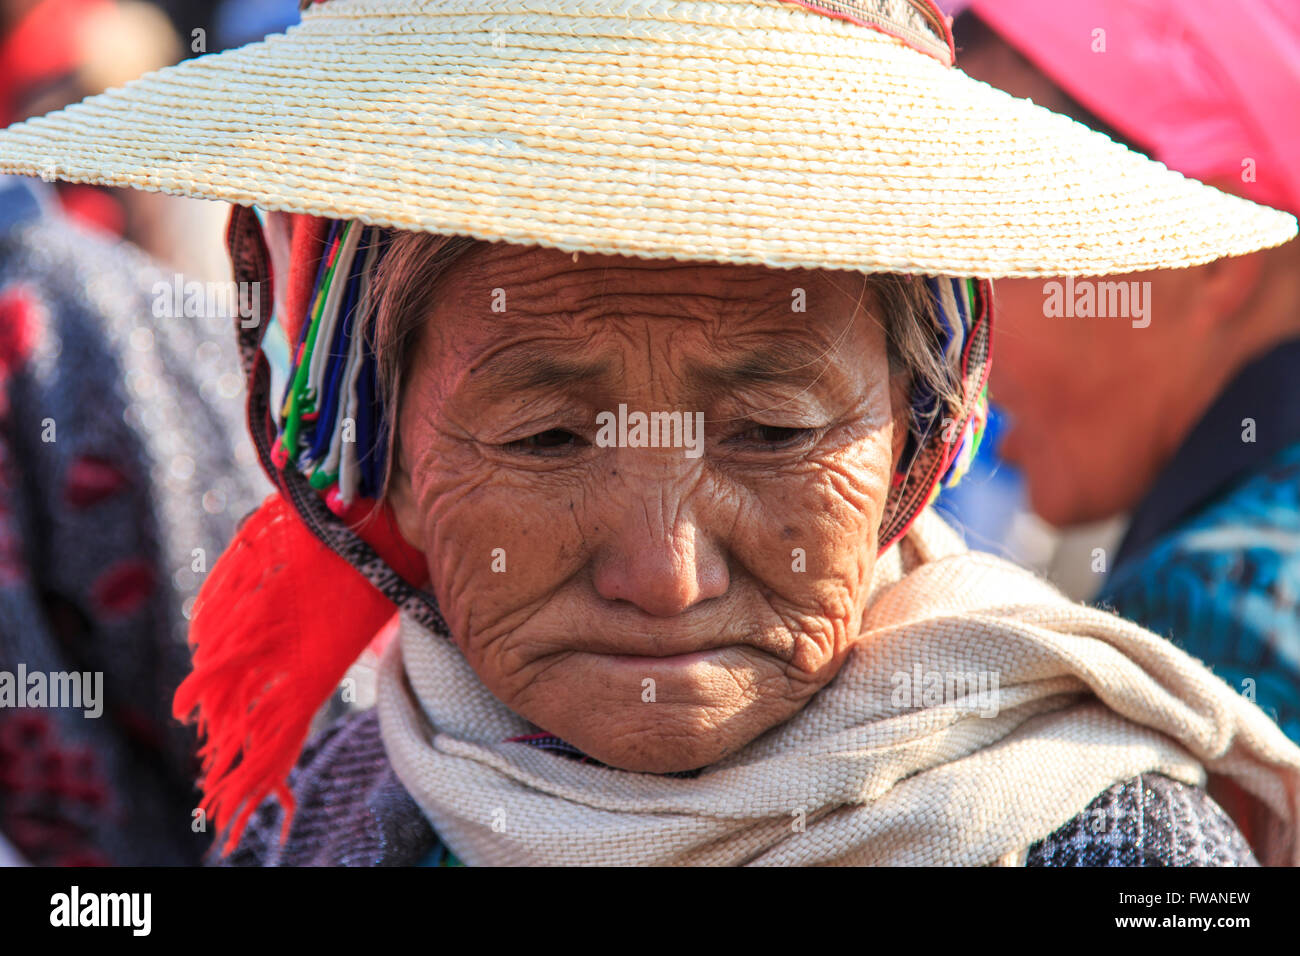 Heqing, China - March 15, 2016: Chinese woman in ancient attire during the Heqing Qifeng Pear Flower festival Stock Photo